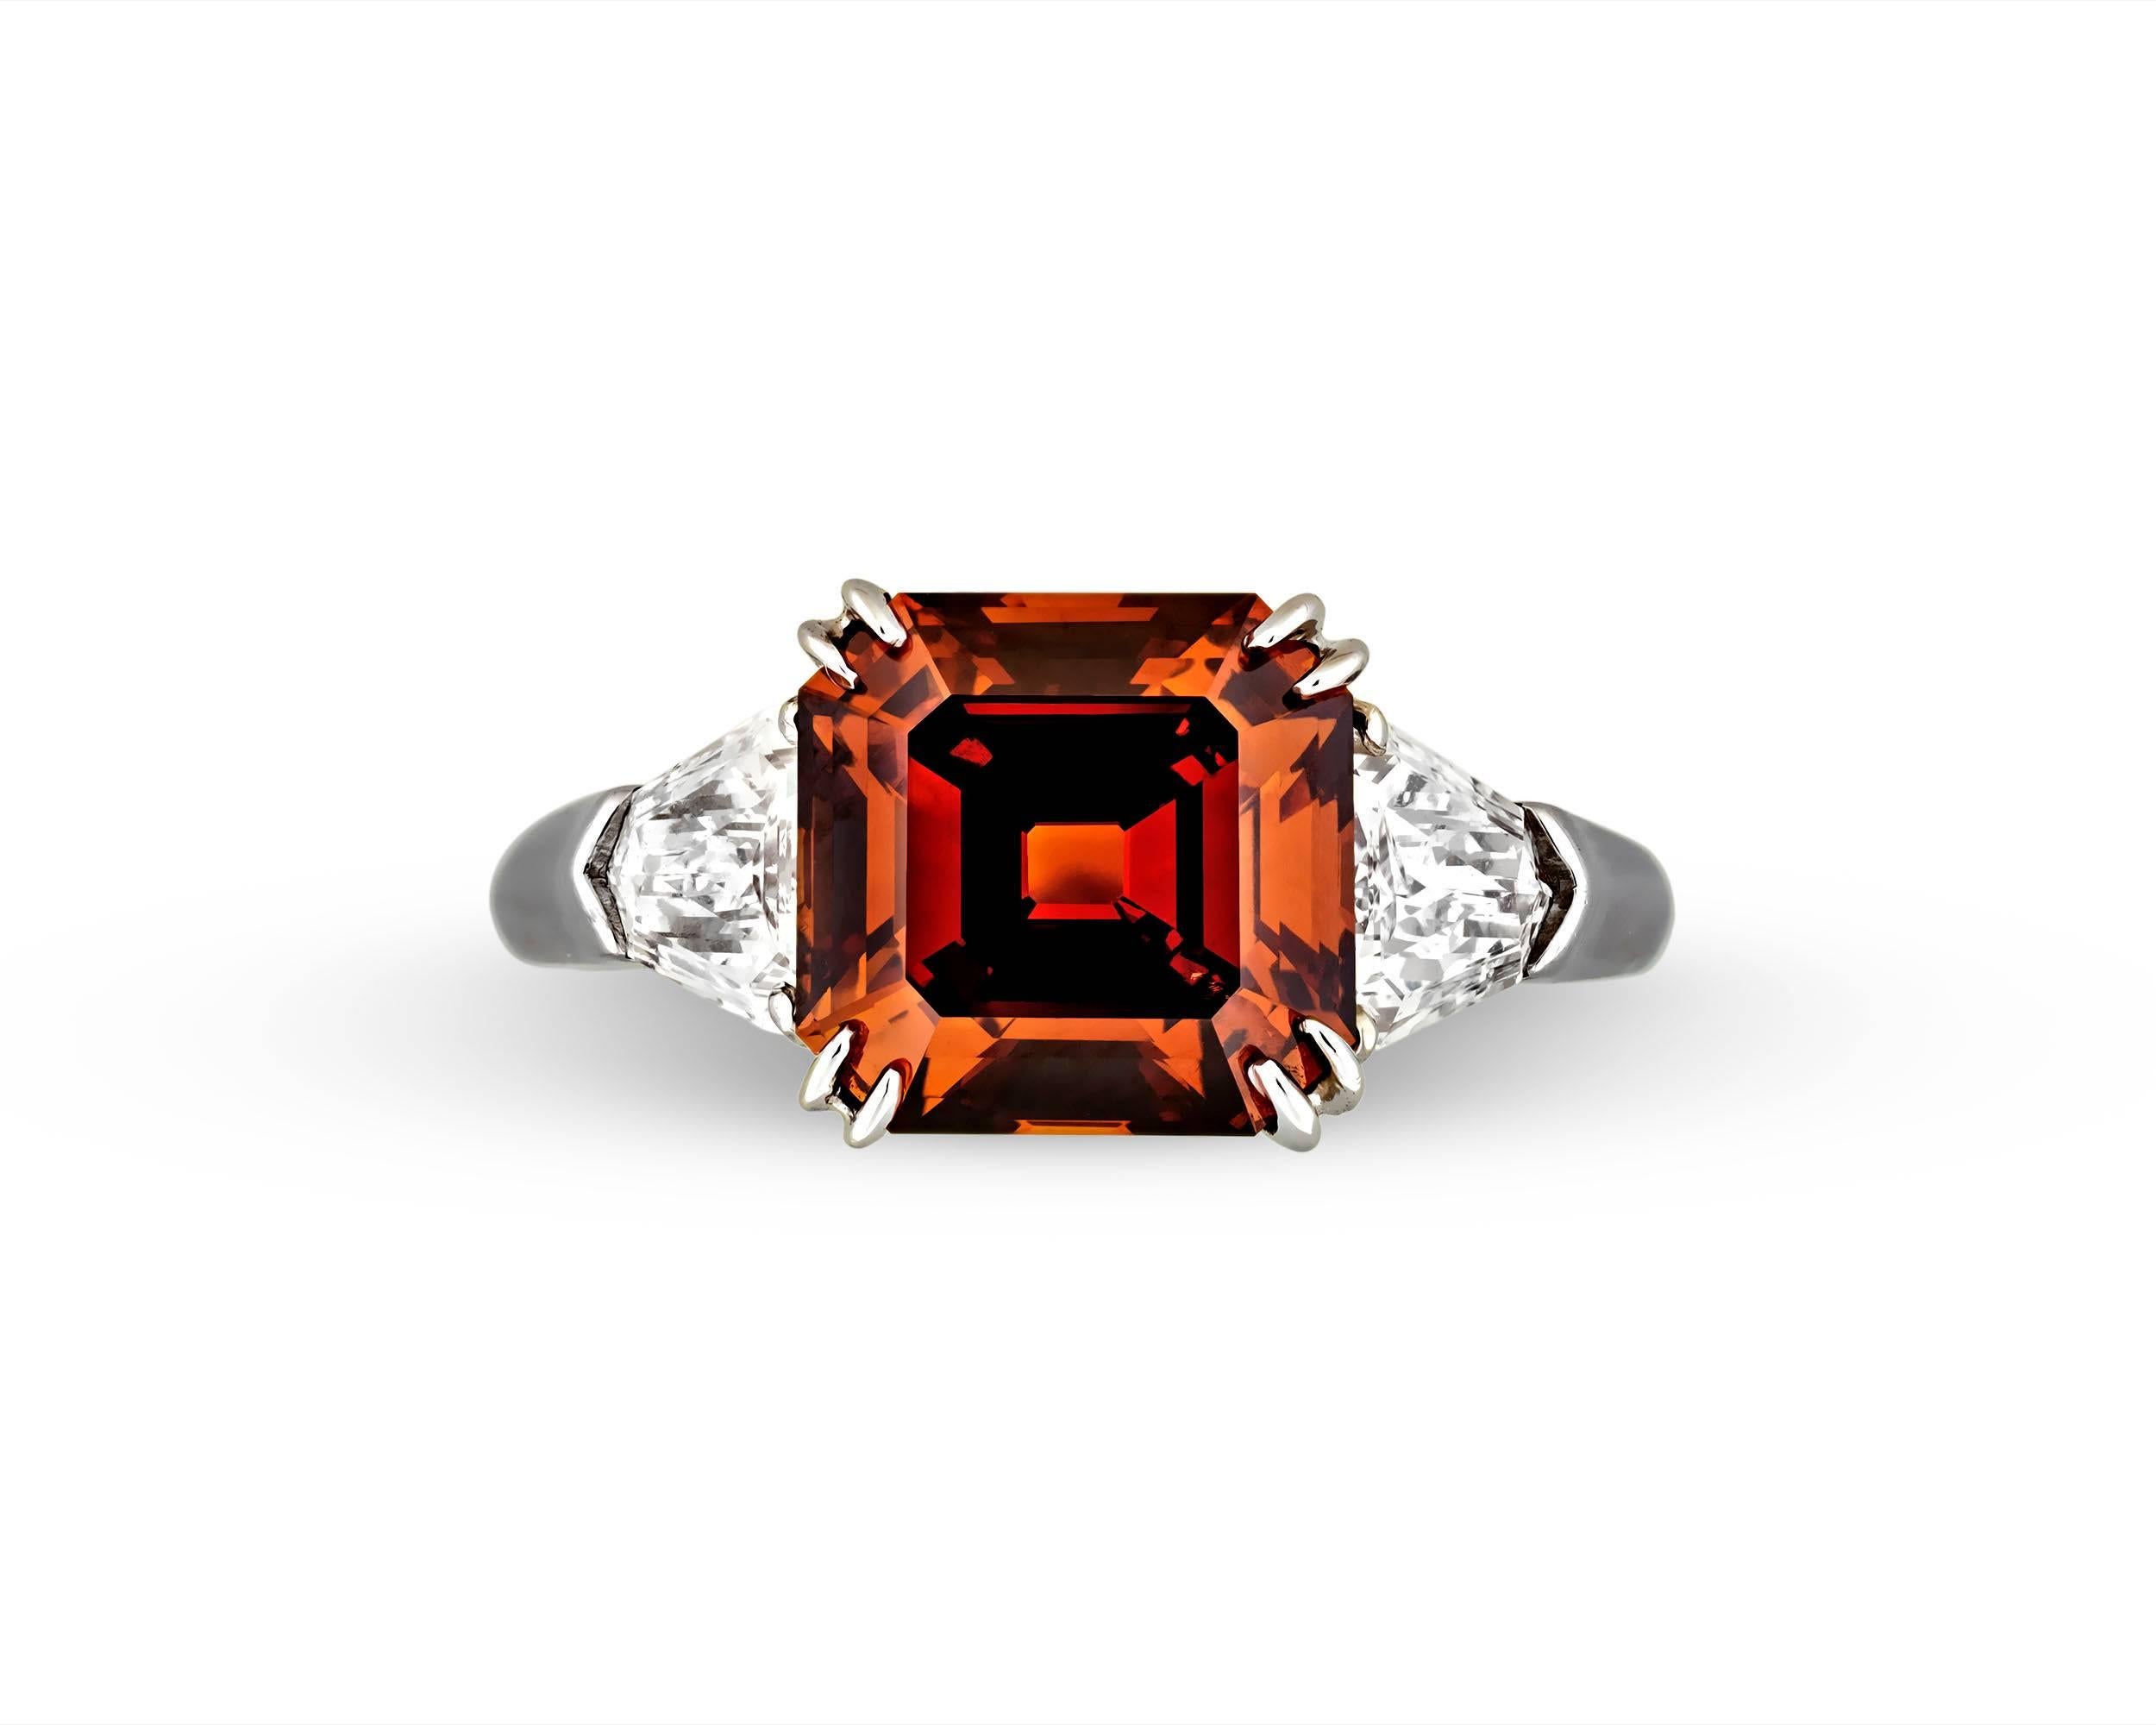 The sumptuous 3.38-carat fancy deep brown orange diamond in this eye-catching ring blazes with an impeccable, fiery orange hue. Referred to as 